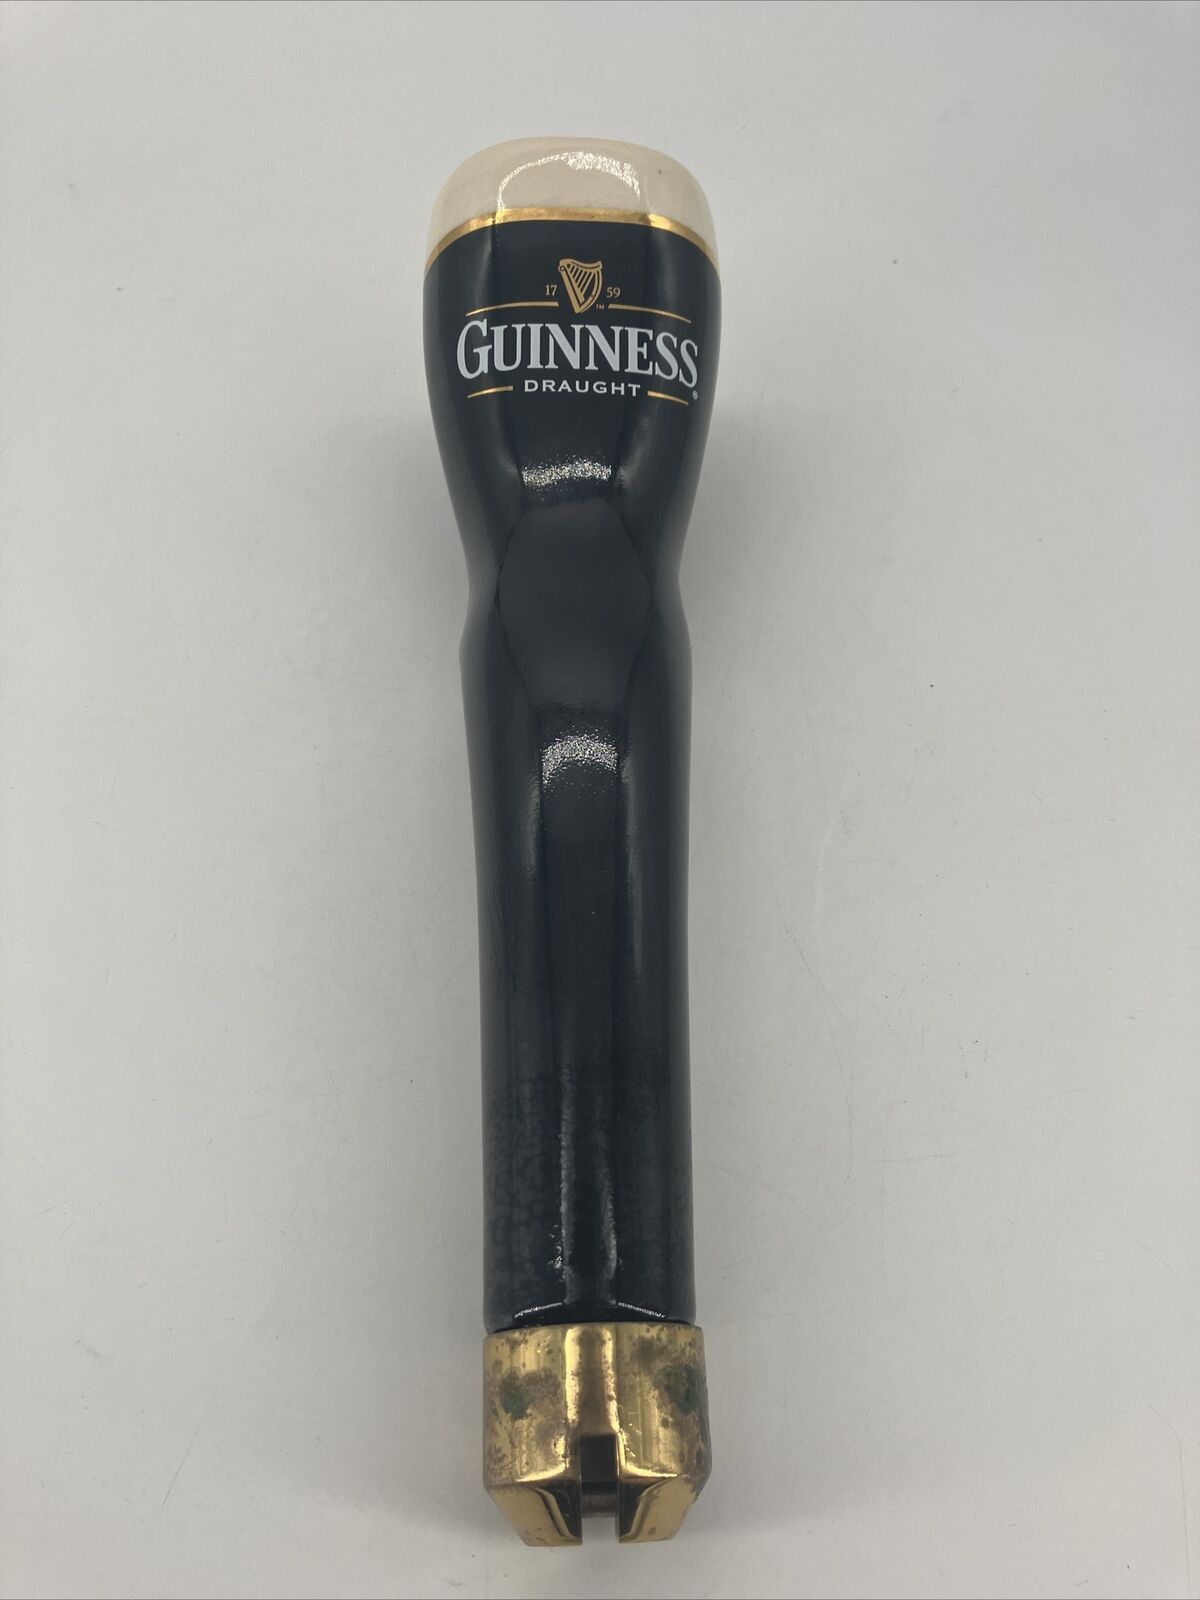 Guinness Draught Irish Stout Vintage Beer Tap Handle